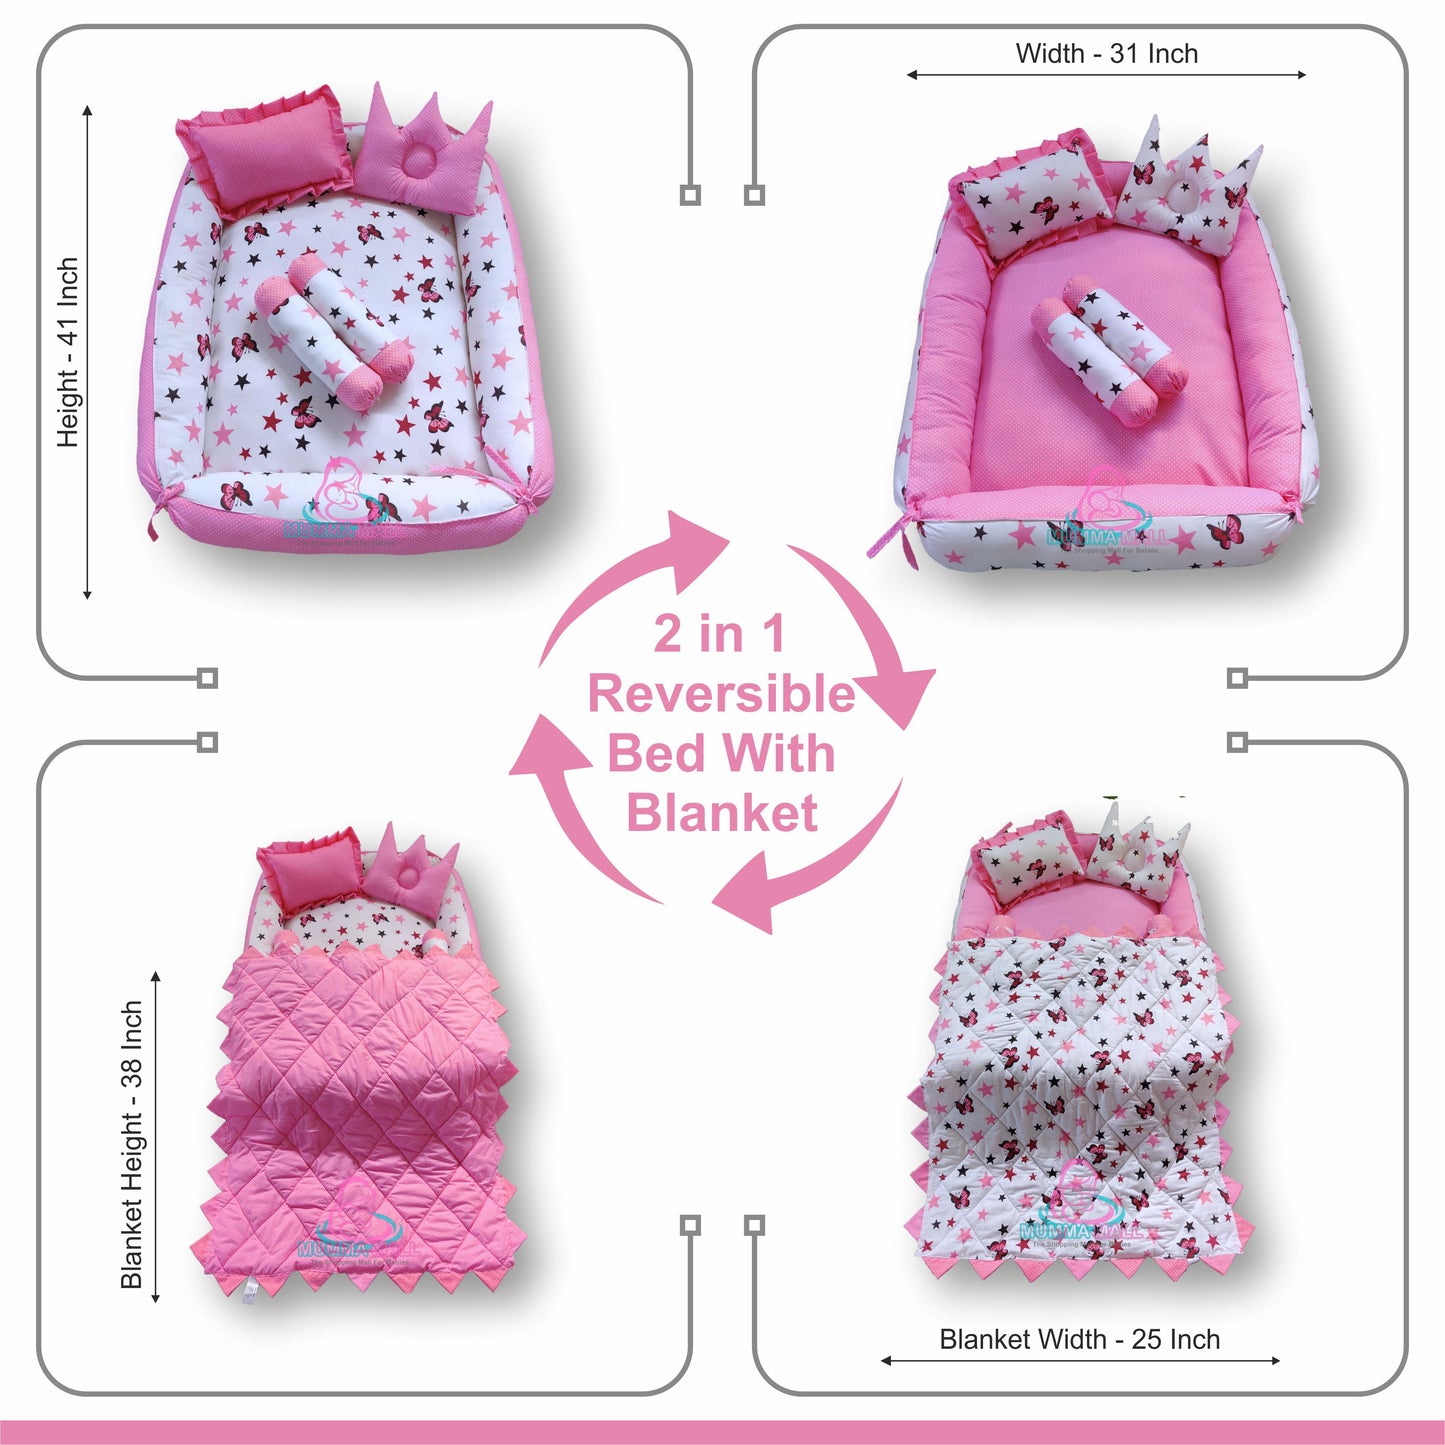 Baby box mattress with blanket and set of 4 pillows as neck support, side support and toy (Pink and White)